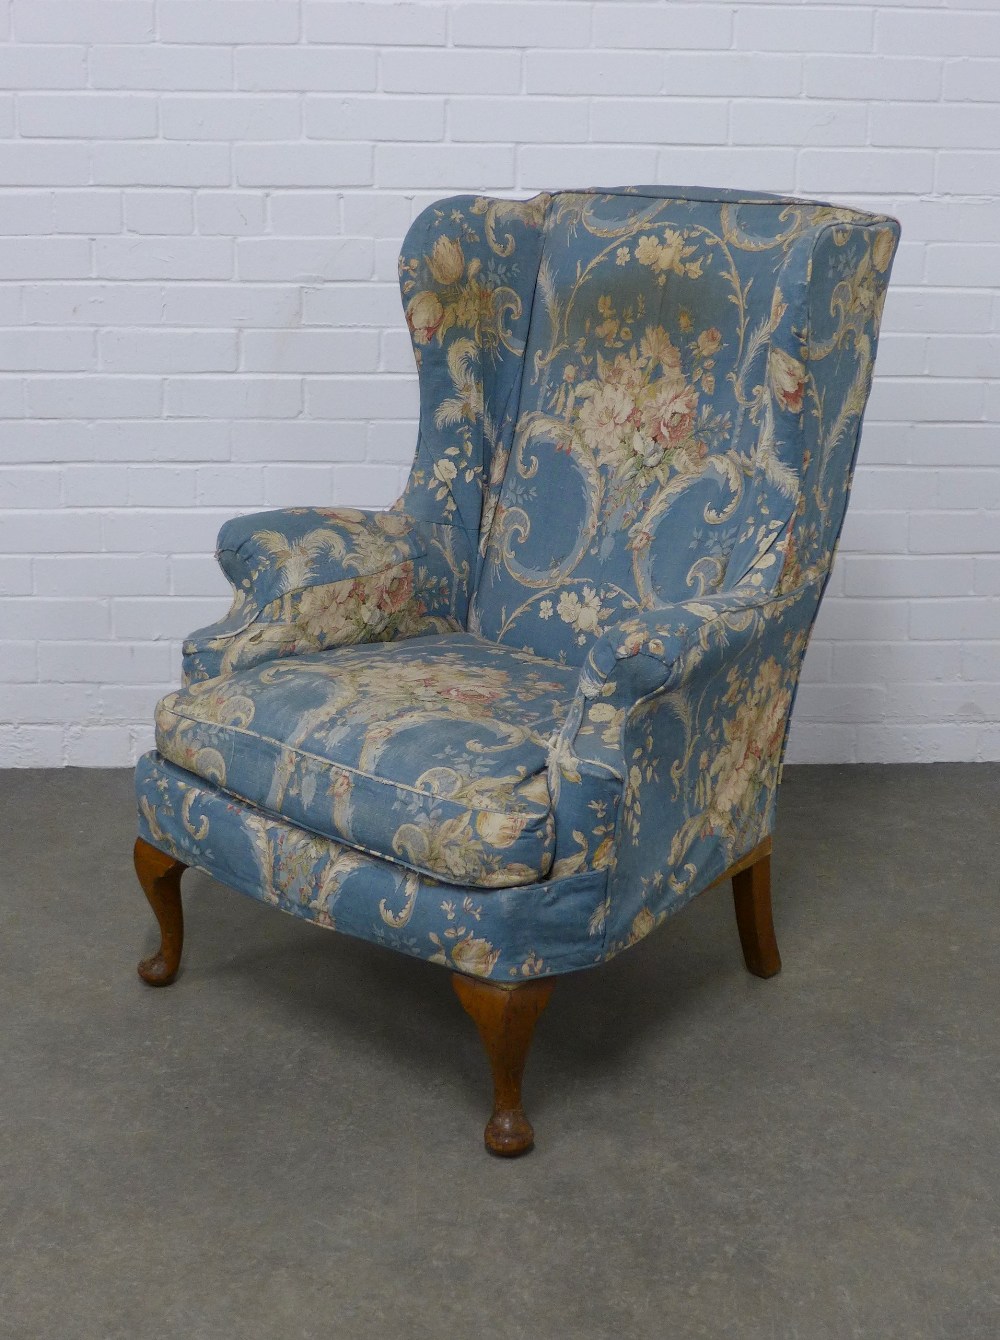 Wingback armchair with country house floral upholstery / covers, 78 x 102 x 52cm.